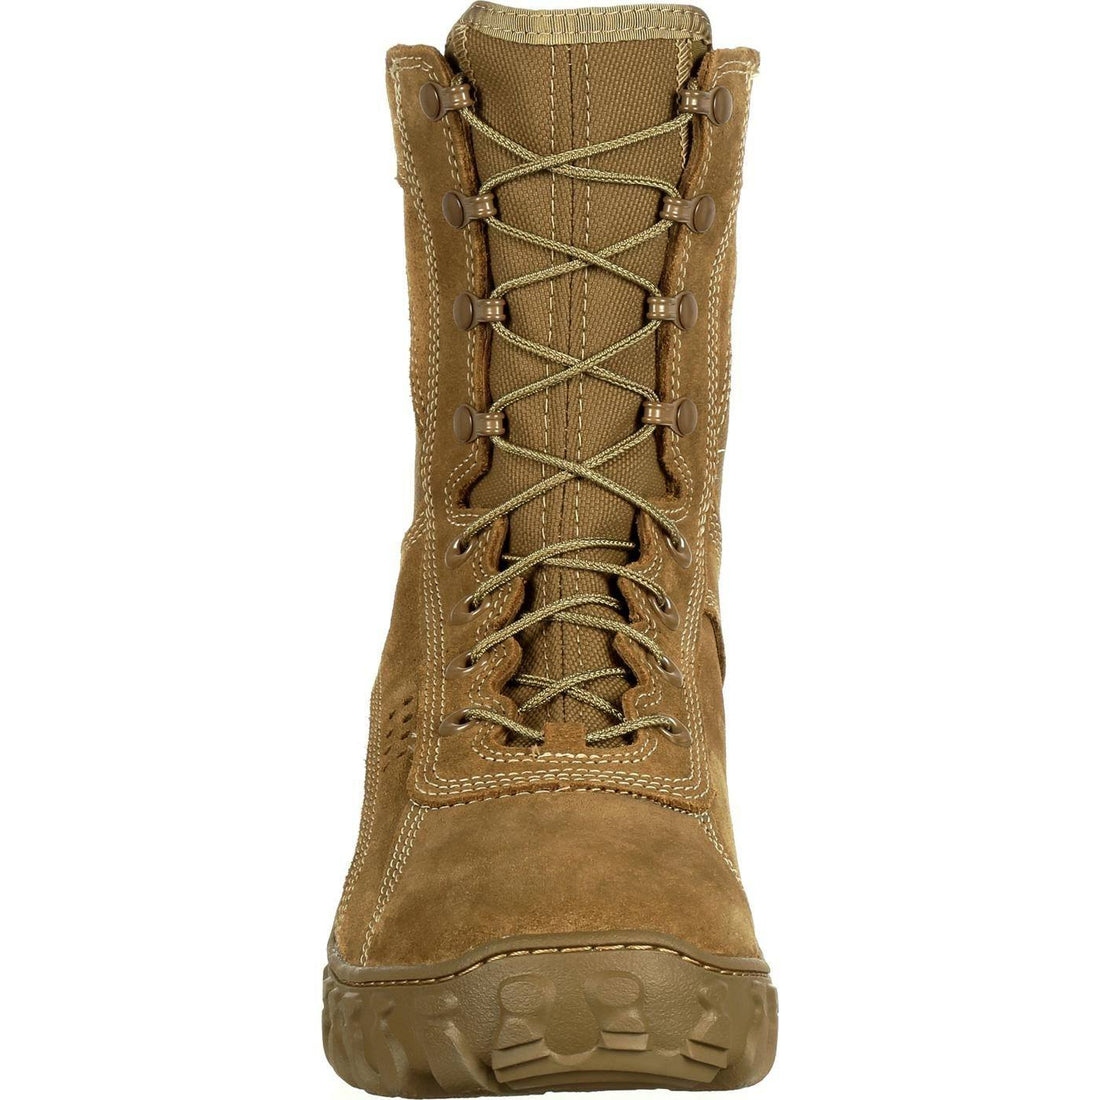 Apparel - Feet - Boots - Rocky S2V Hot Weather Military Boots (RKC050)